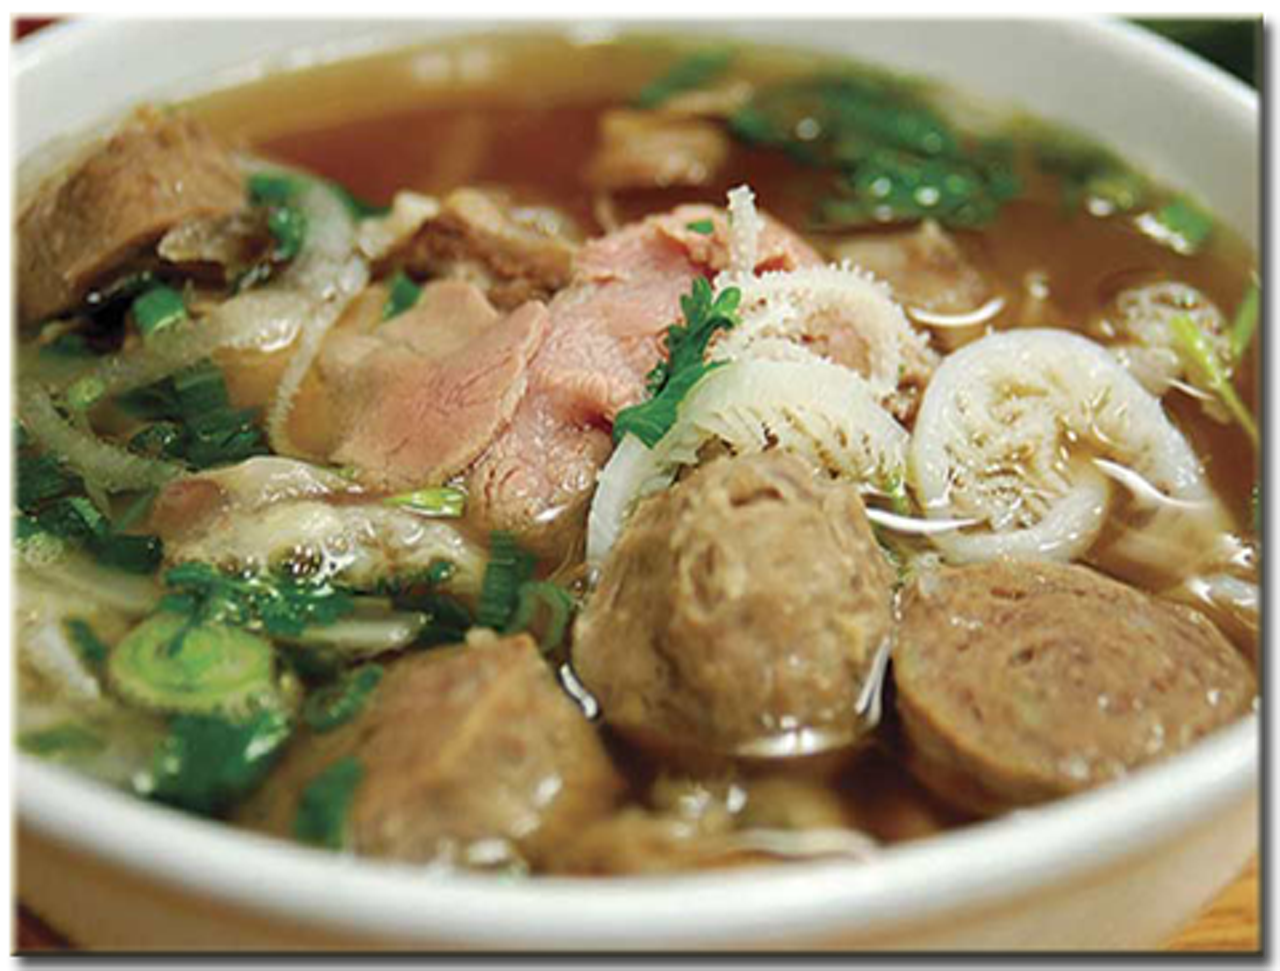 Pho 99 is located at 3820 Superior Avenue, Cleveland. Call (216)586-6969 or visit www.pho99.com for more information.